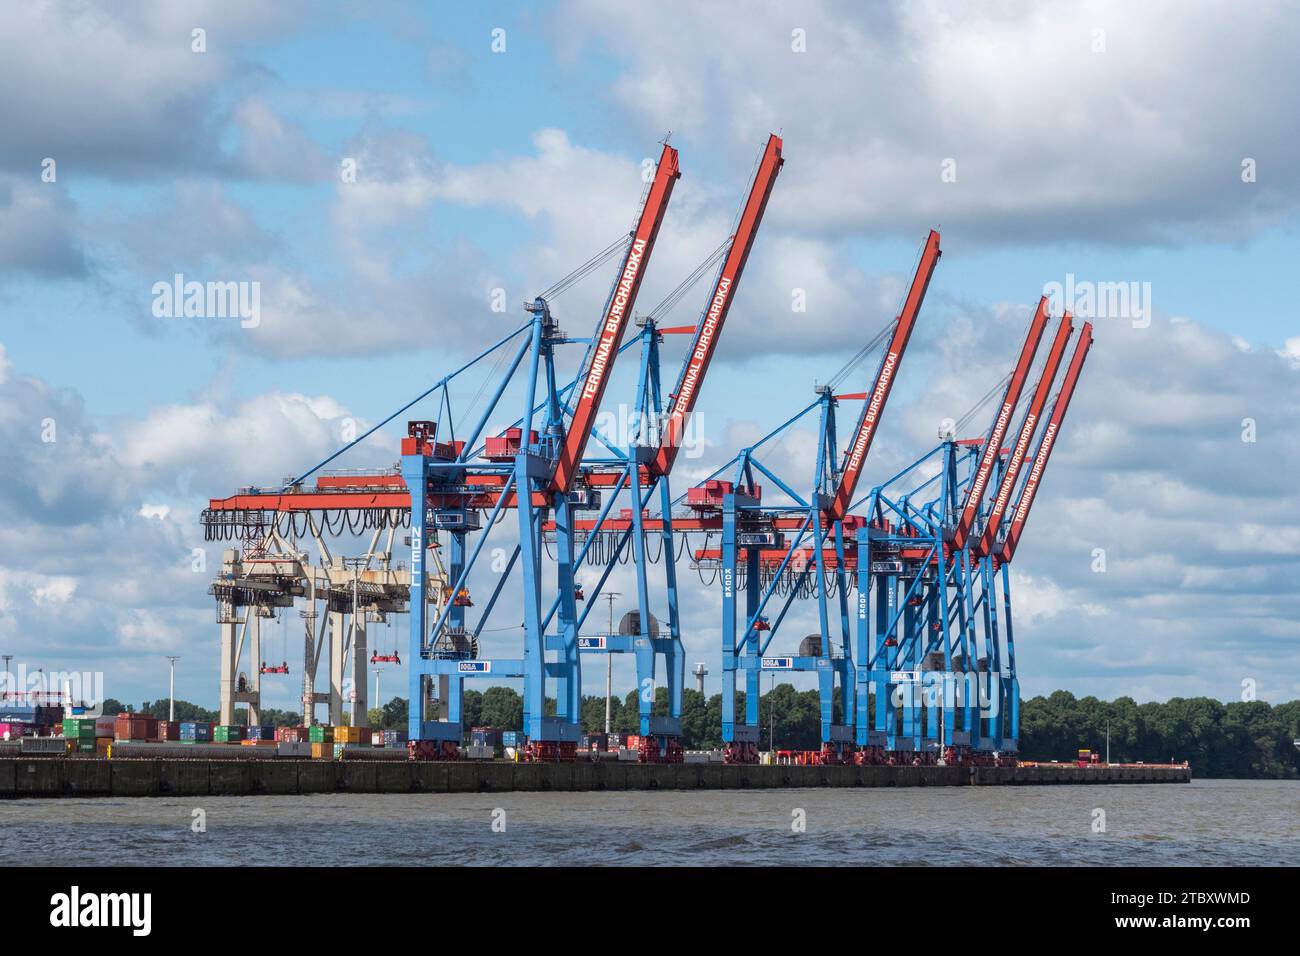 Some dock container cranes at Terminal Burchardkai in the Port of Hamburg viewed from the 62 HADAG ferry in Hamburg, Germany. Stock Photo